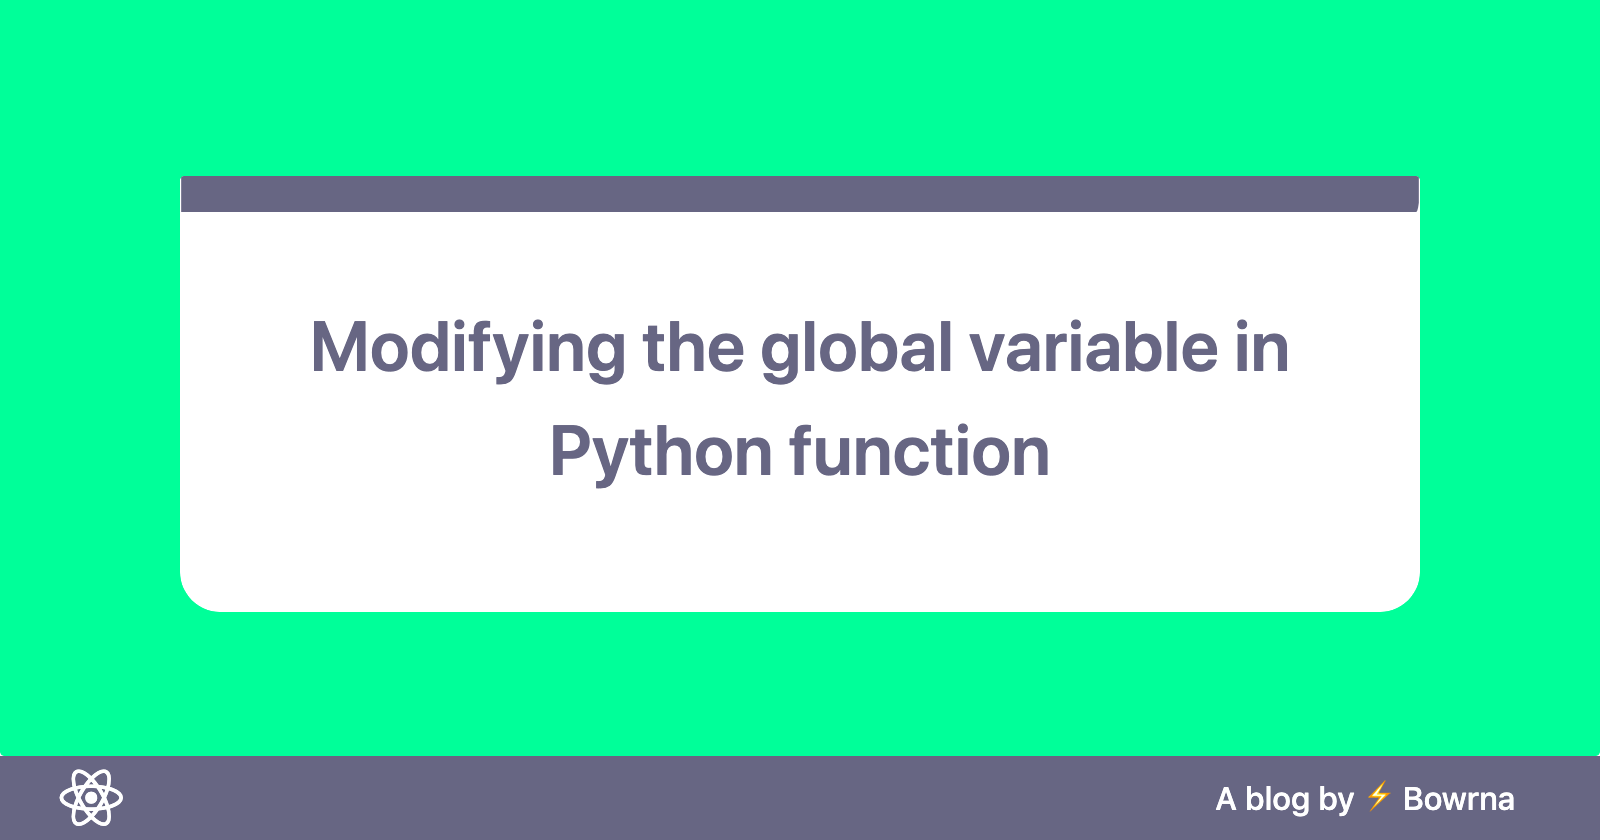 Modifying the global variable in Python